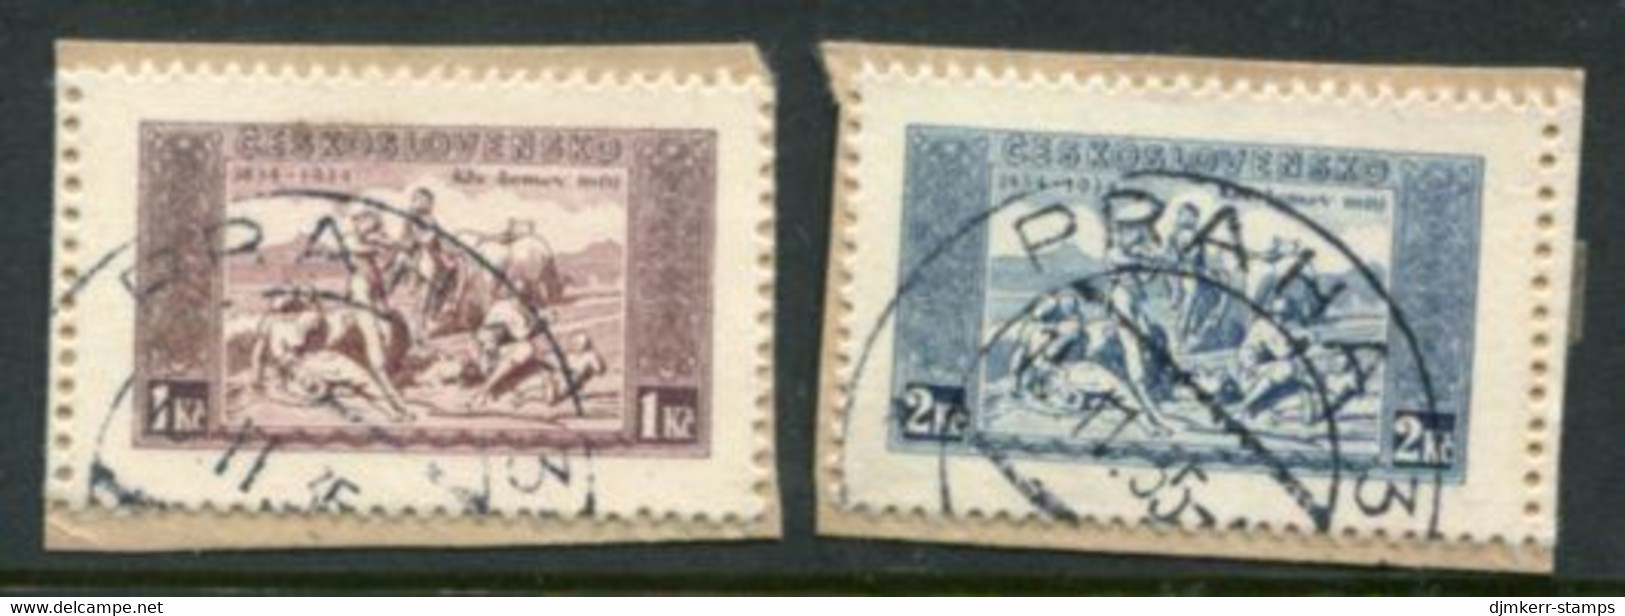 CZECHOSLOVAKIA 1934 National Anthem Centenary 1 Kc, 2 Kr.. On Carton Paper Used On Pieces. .  Michel 330-31x - Used Stamps